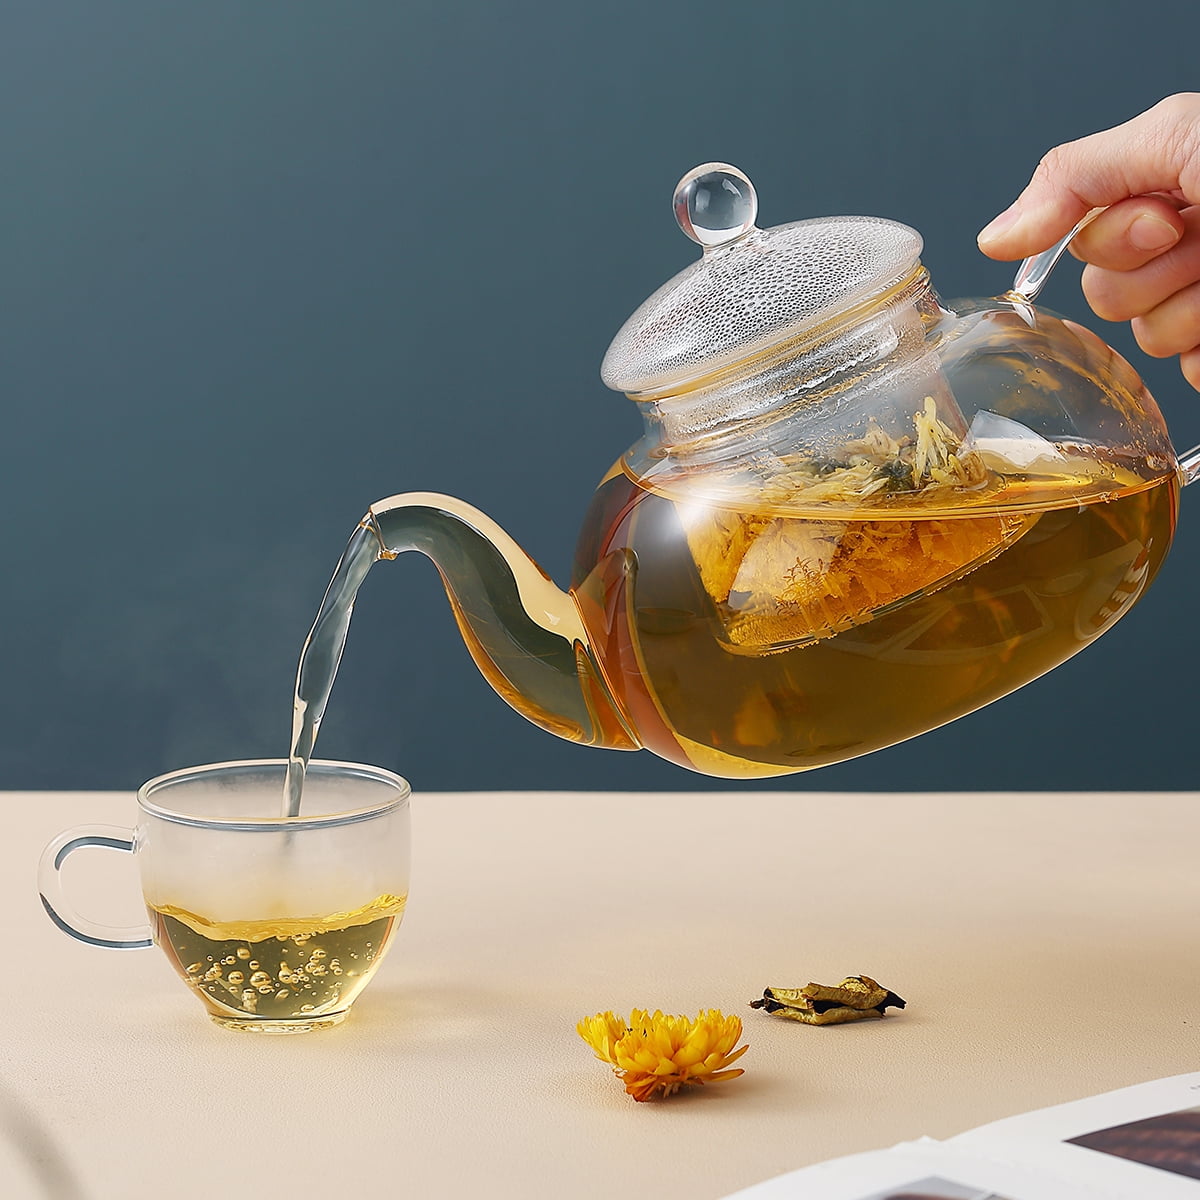 Glass Teapot with Infuser 54oz/1600ml – My Teamania